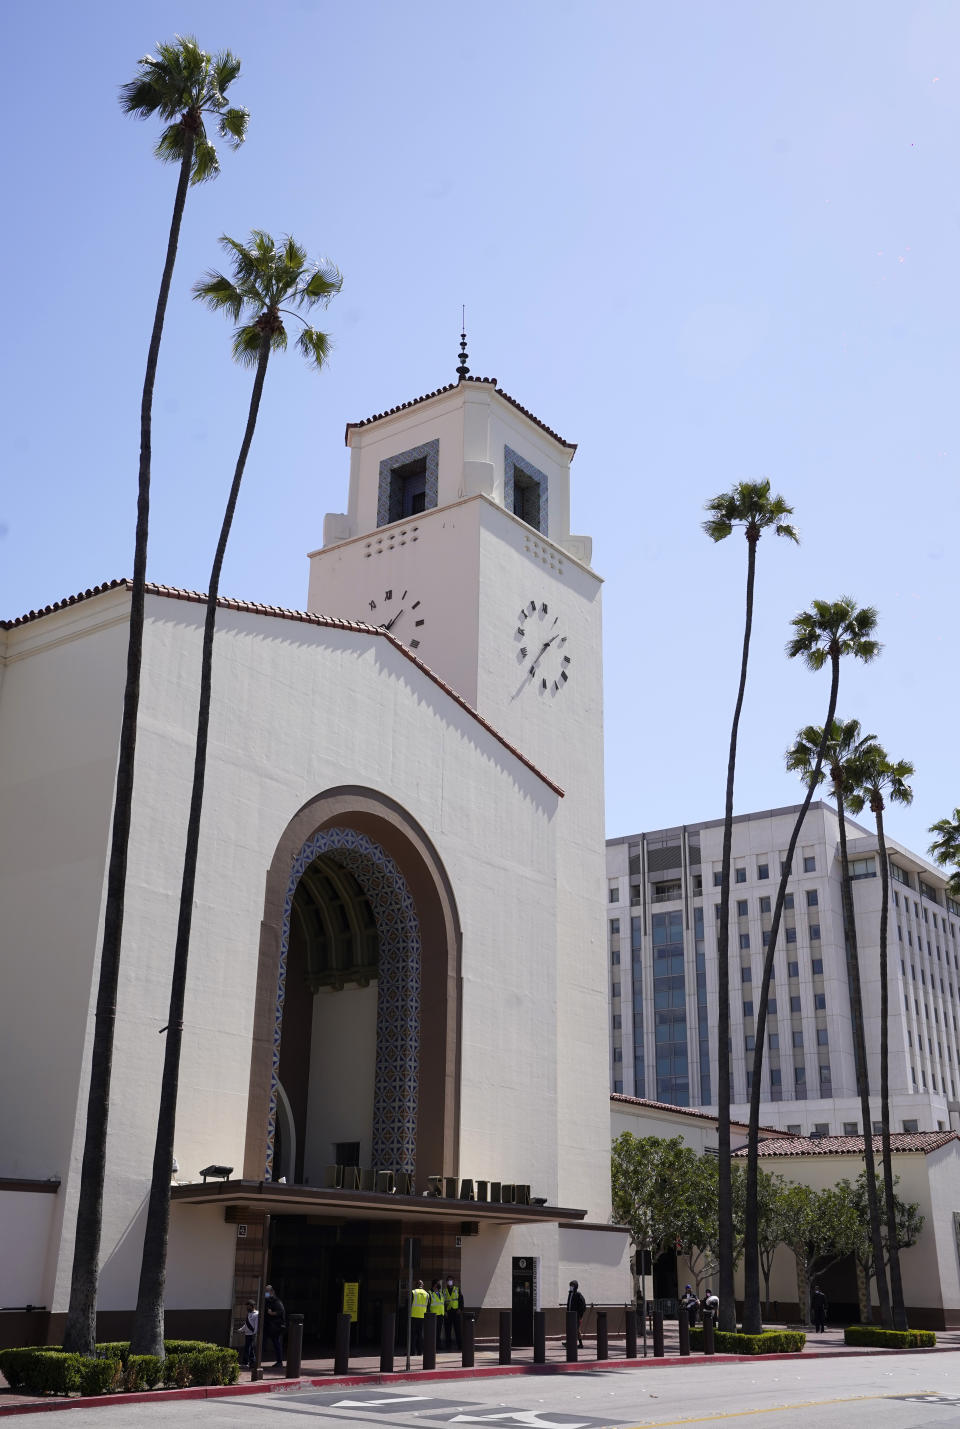 The exterior of Union Station in Los Angeles appears on March 23, 2021. The Oscars are headed to the historic site for the first time this year. With wide open spaces and 65-foot high ceilings, it’s ideal for a big crew and cameras. It’s been used in car commercials, reality shows and procedurals. But its beamed ceilings, Spanish tile floors and regal bronze chandeliers really shine in cinema where it’s played train stations, banks, police stations, clubs and airports. (AP Photo/Chris Pizzello)